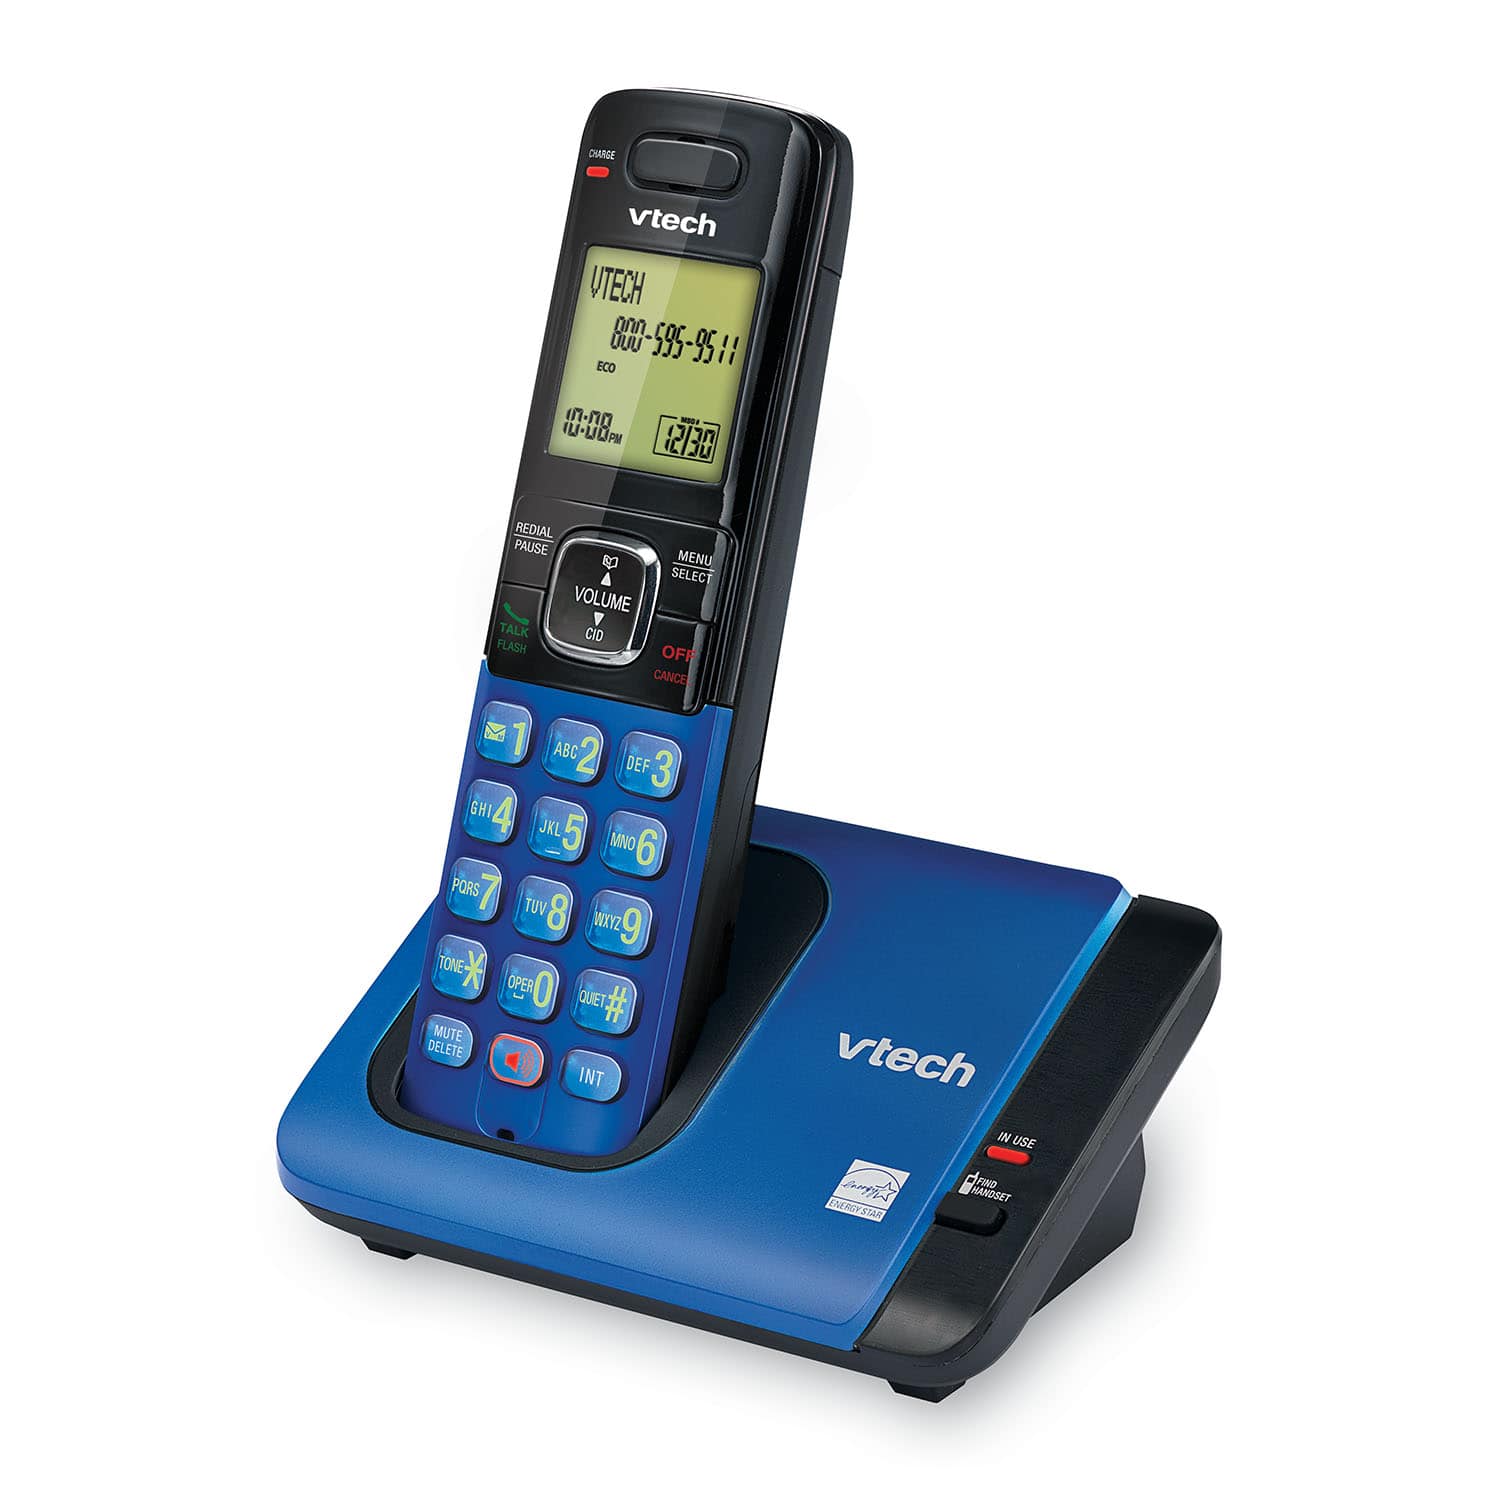 Cordless Phone with Caller ID/Call Waiting